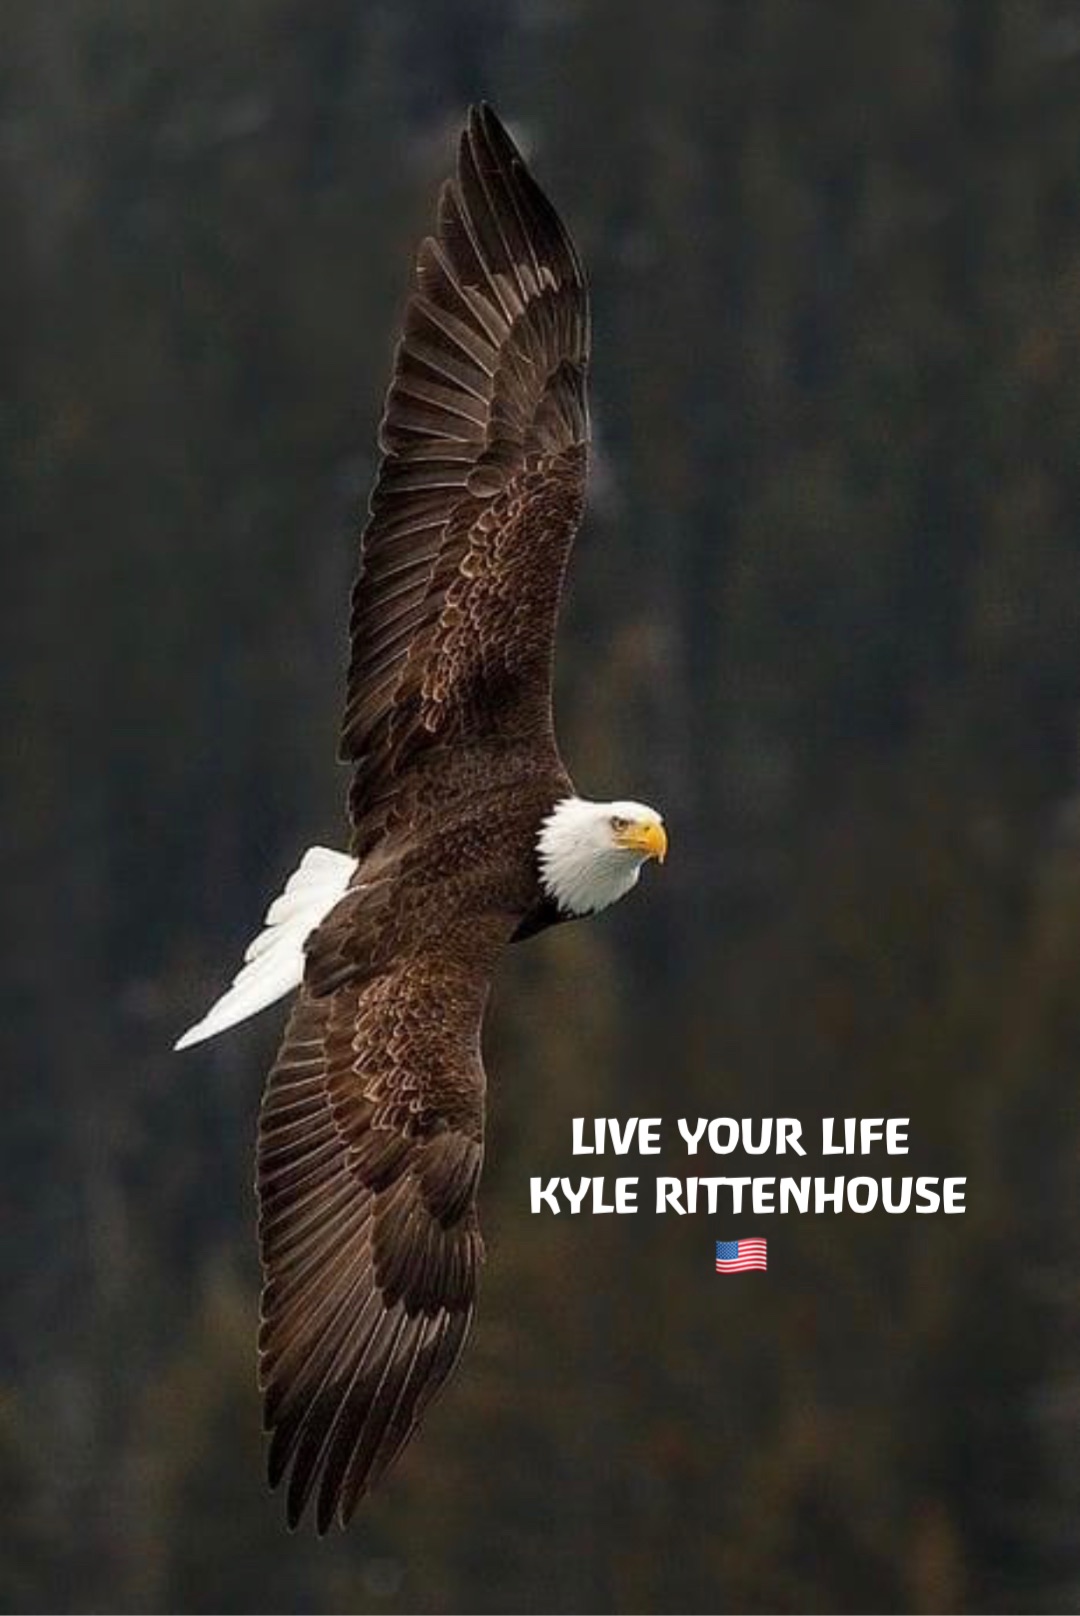 LIVE YOUR LIFE
KYLE RITTENHOUSE 
🇺🇸